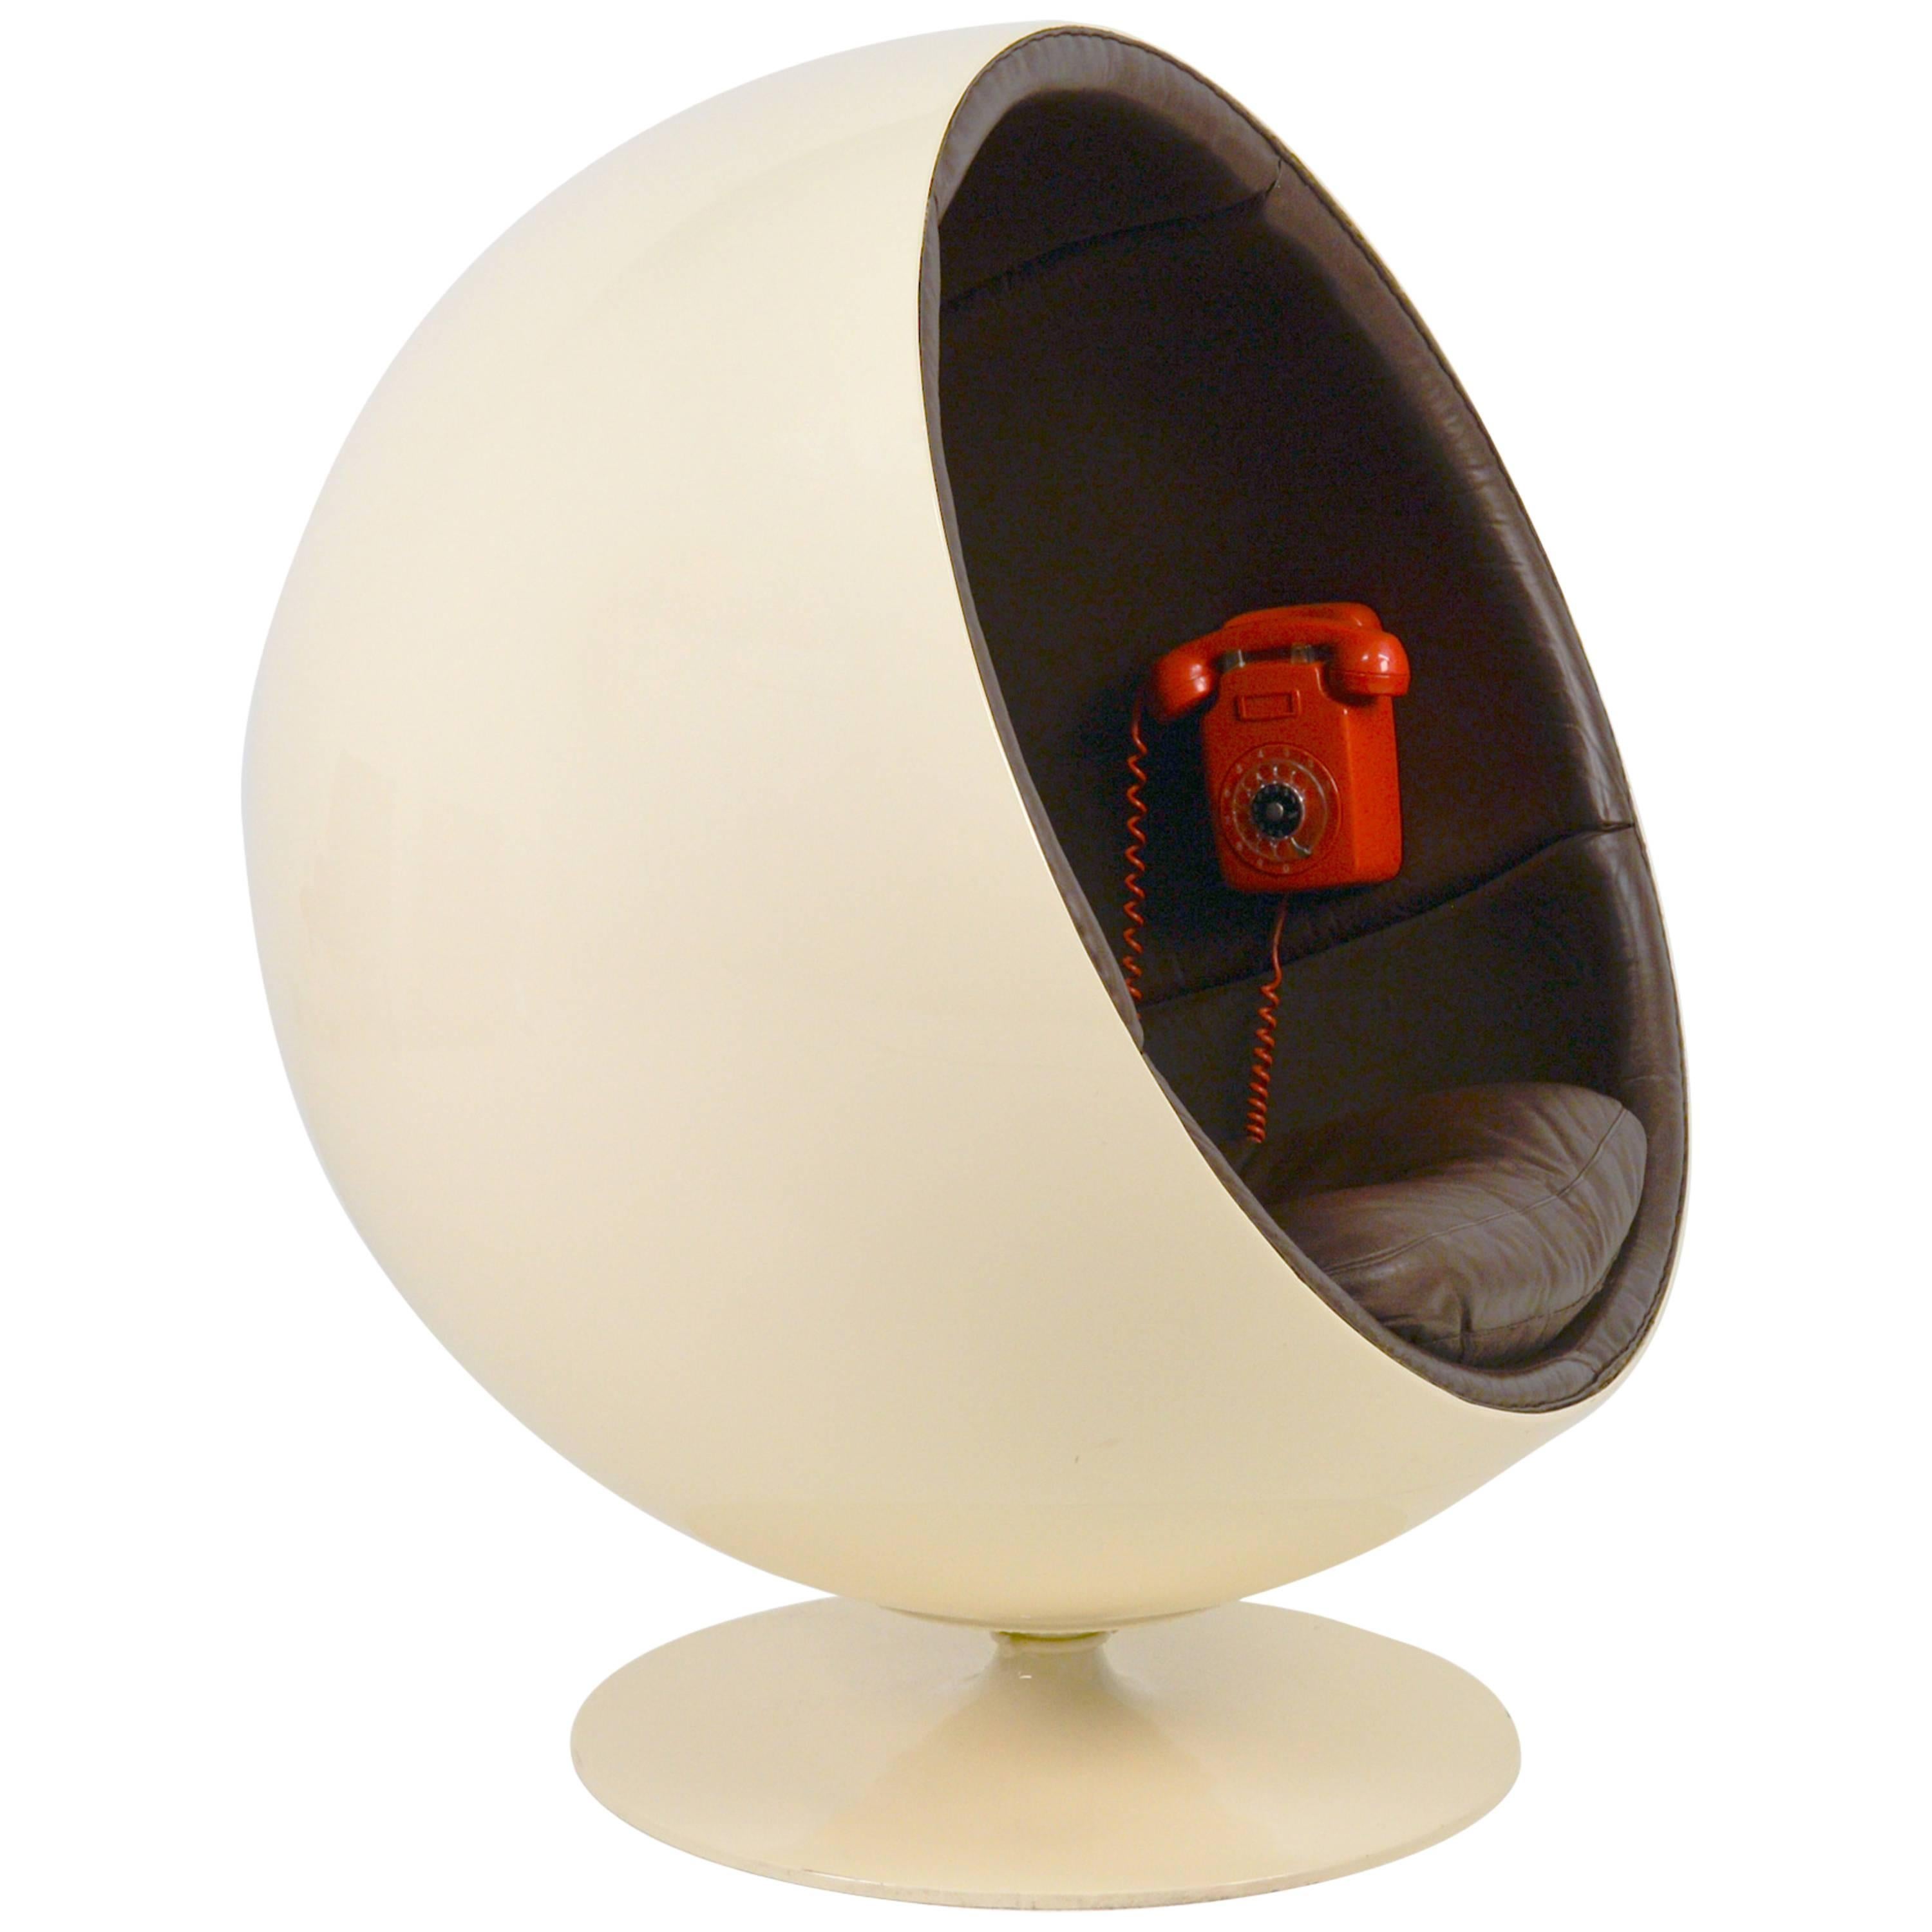 Extremely Rare Ball Chair by Eero Aarnio Made by Asko with Phone !! at  1stDibs